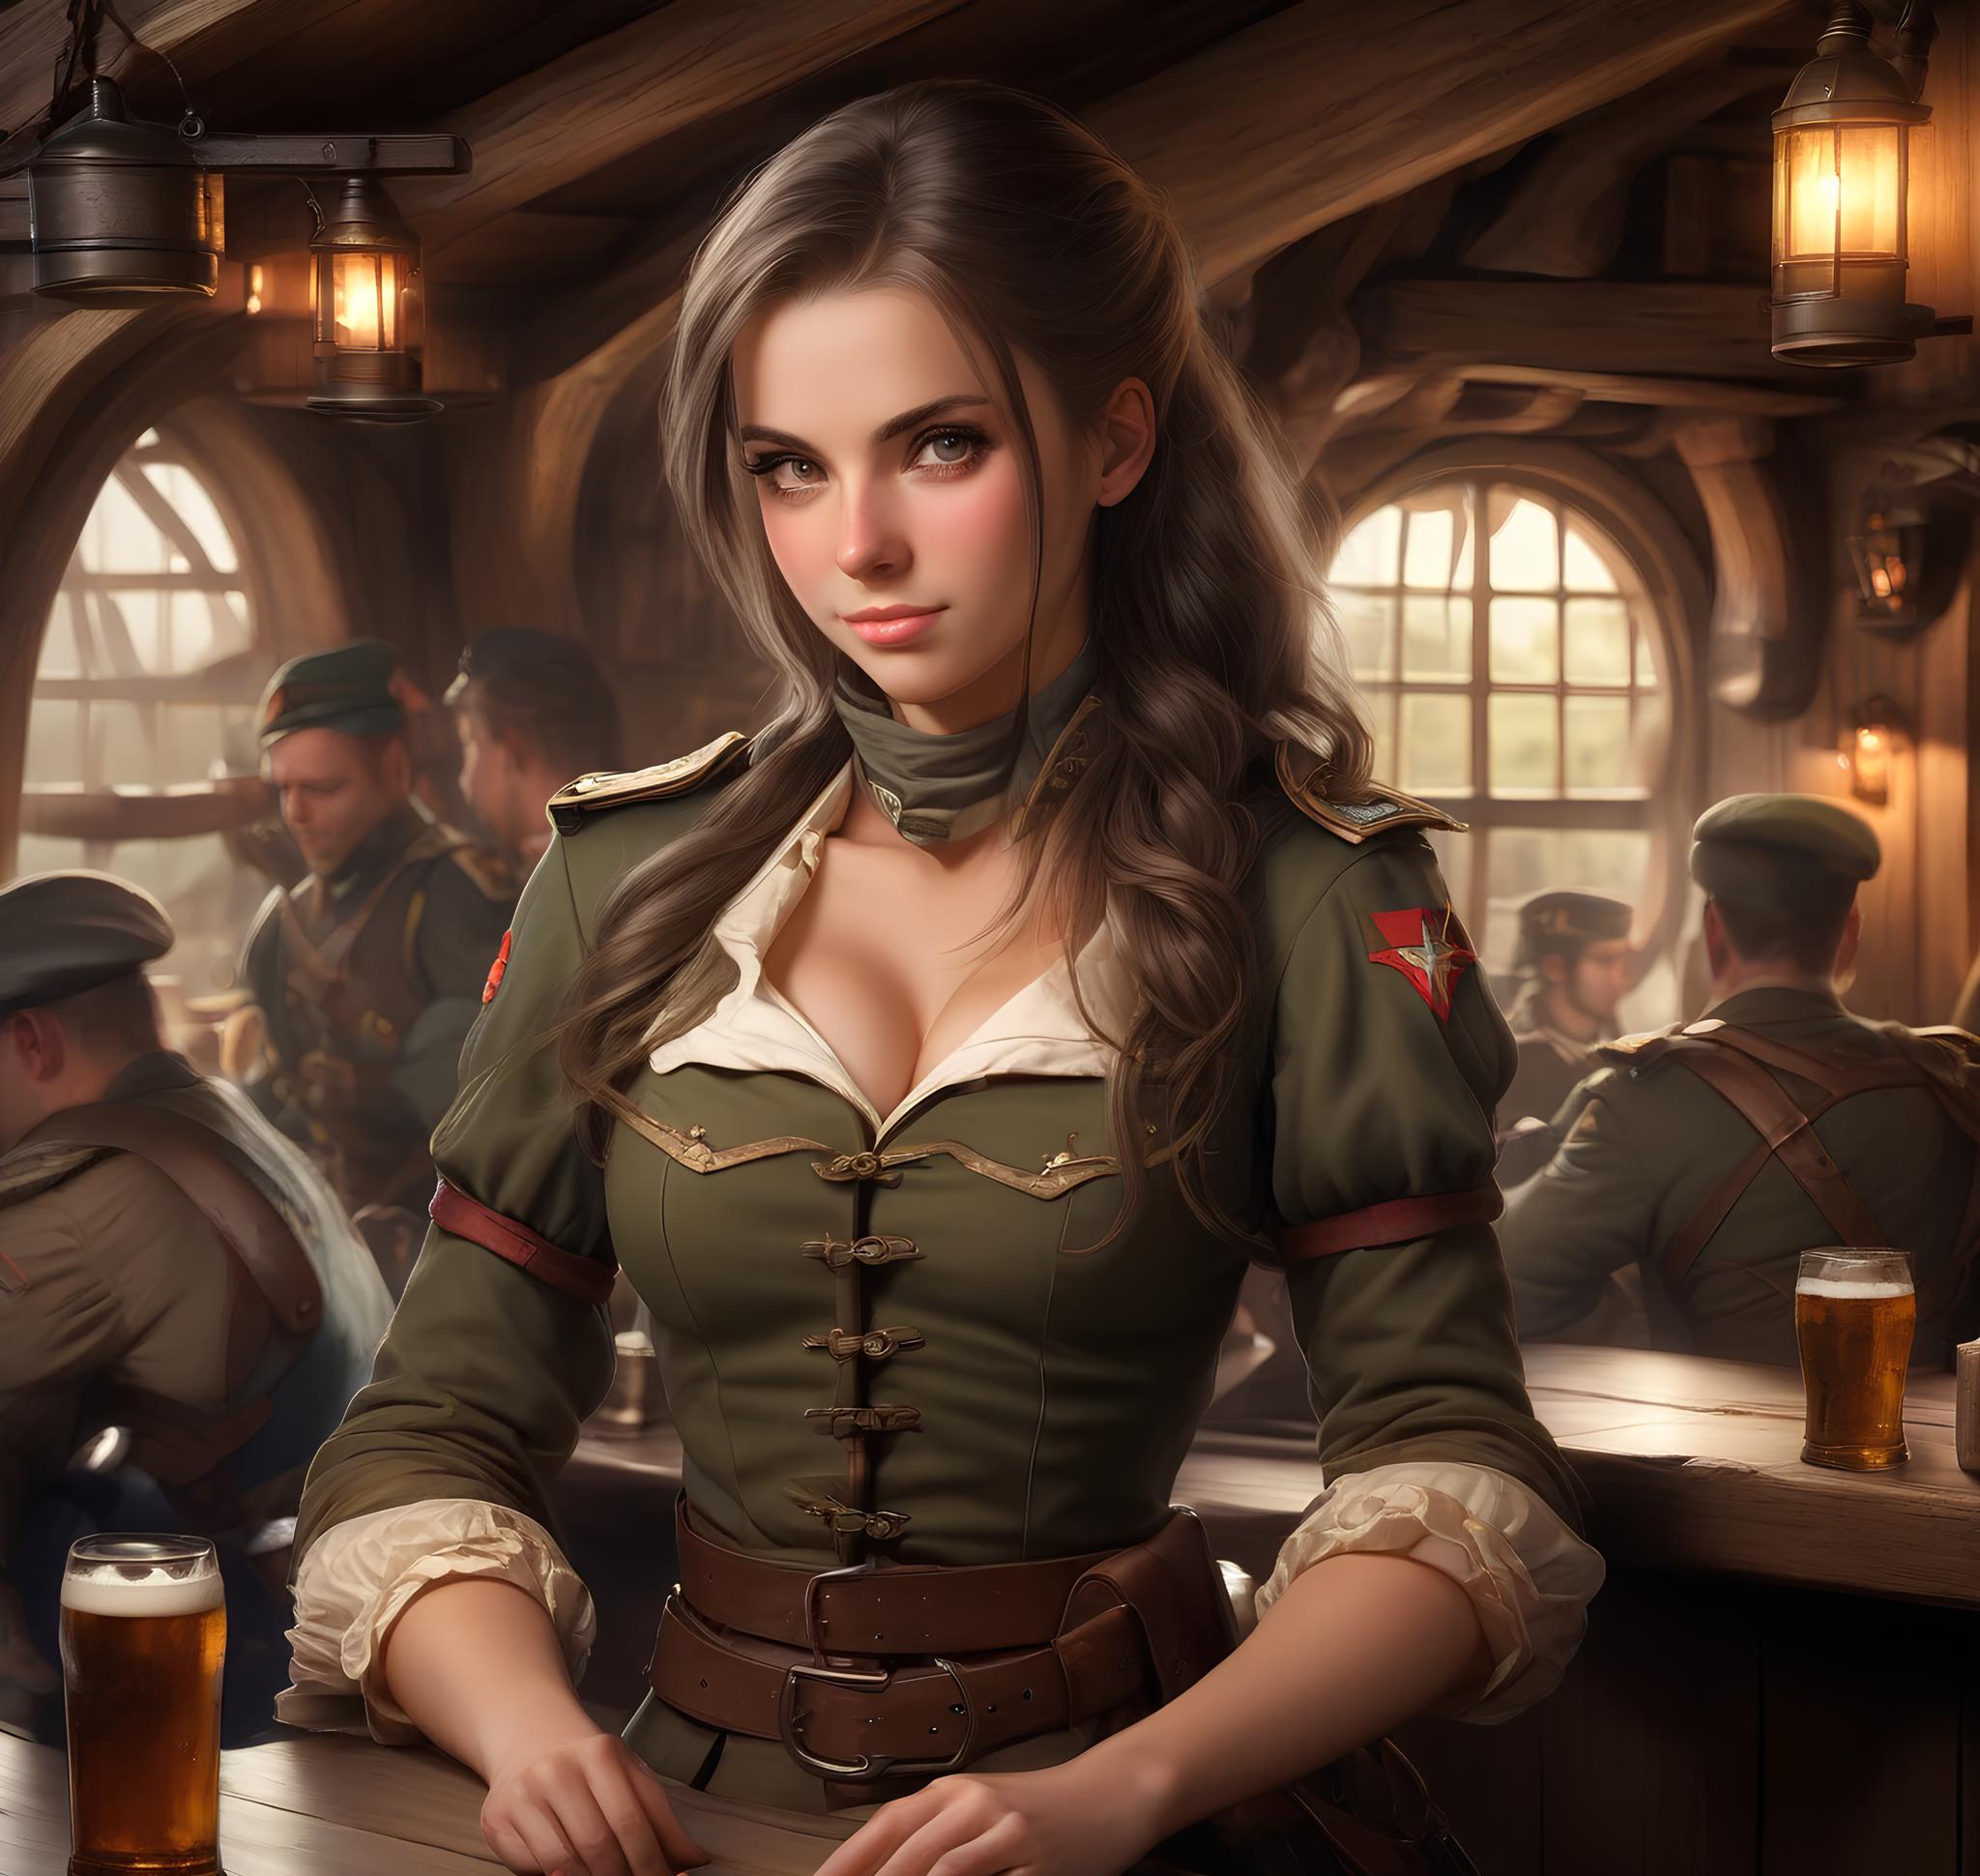 A girl soldier in a tavern